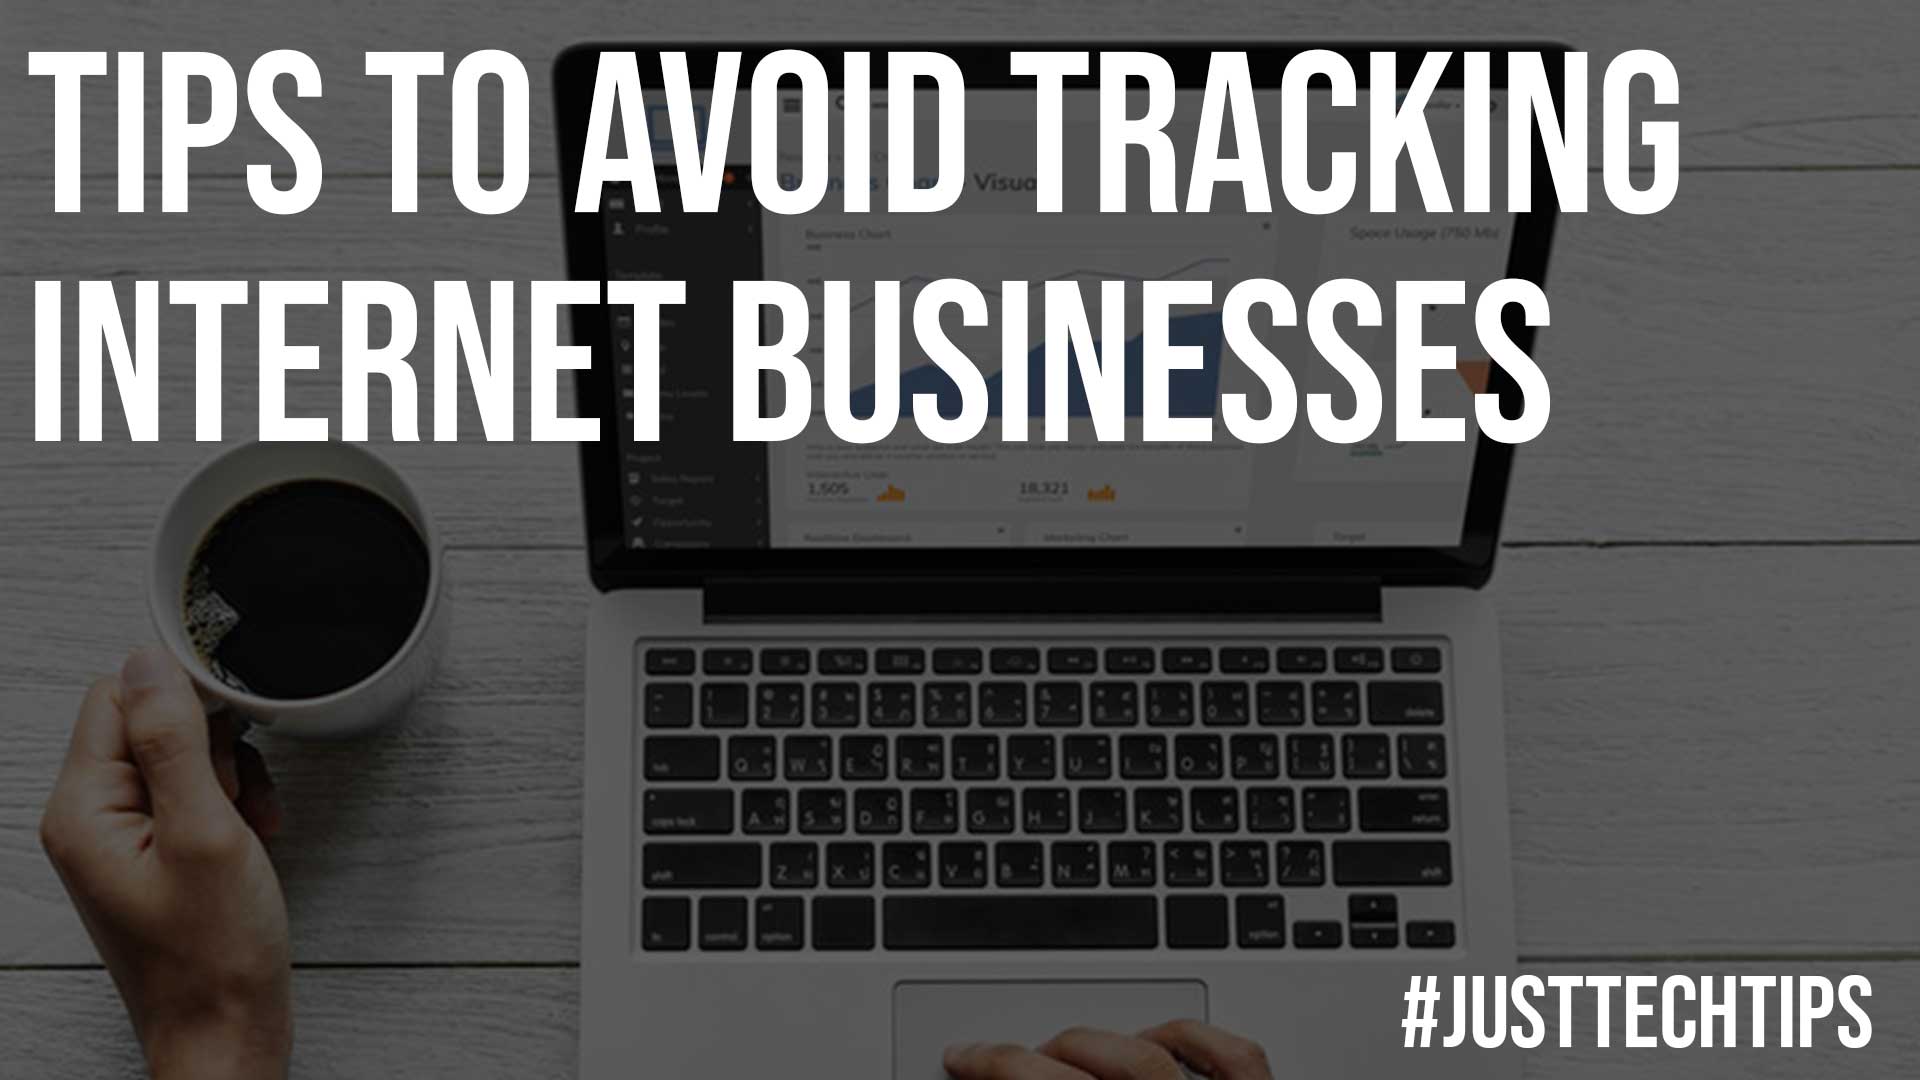 Tips to Avoid Tracking Internet Businesses